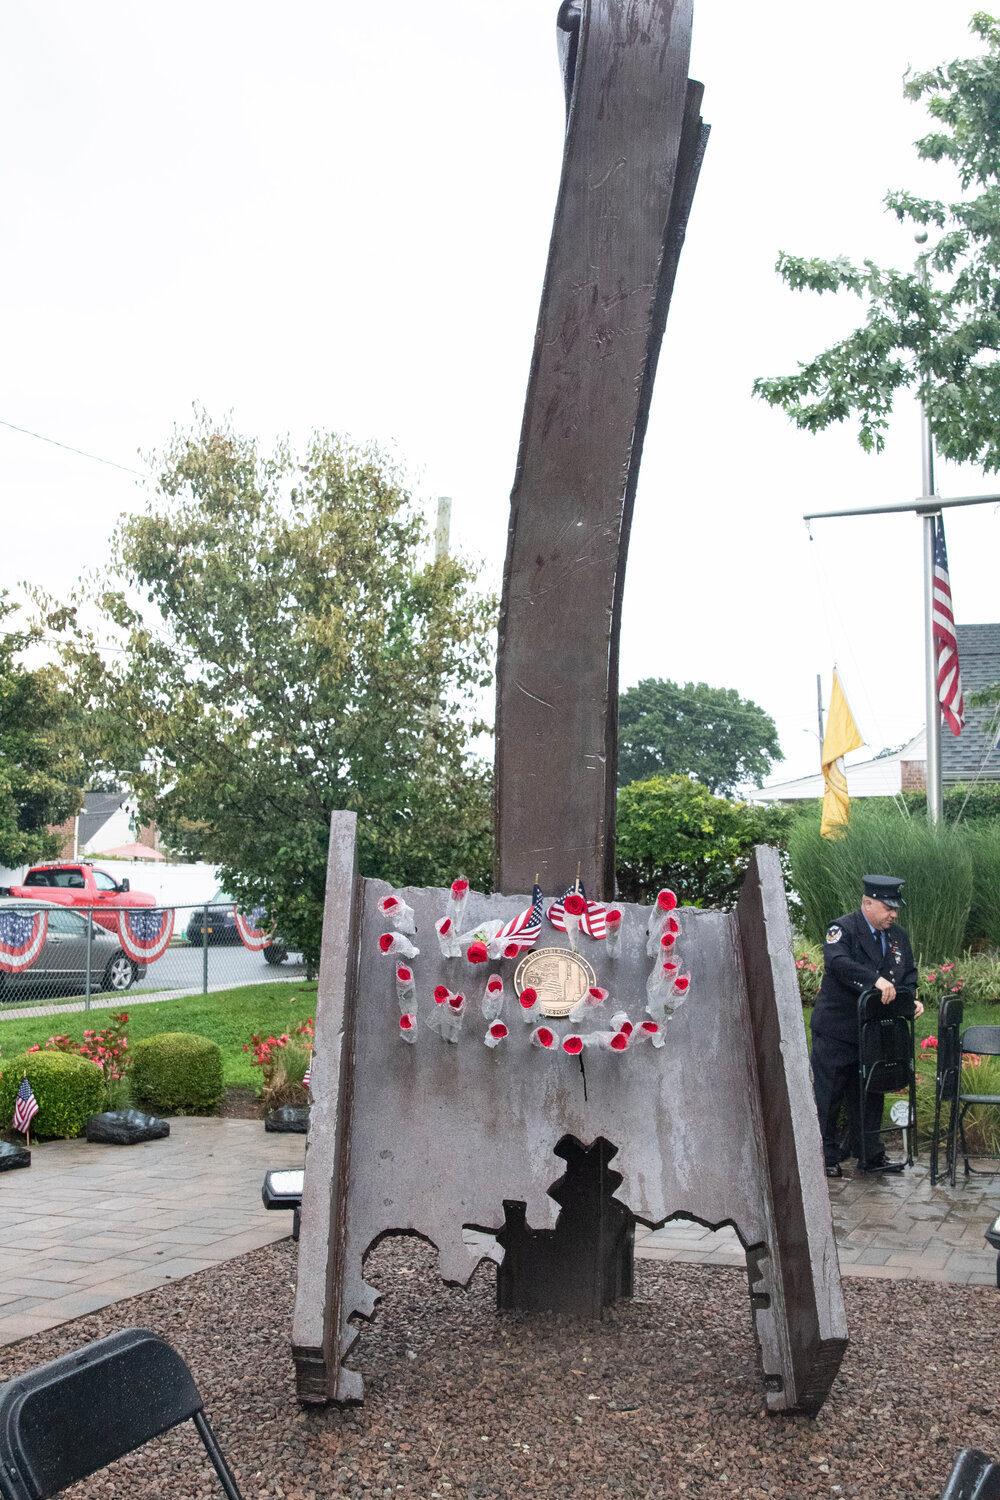 Roses were placed on the steel remnant from the World Trade Center at the Franklin Square 9/11 Memorial as the community remembered those who died.